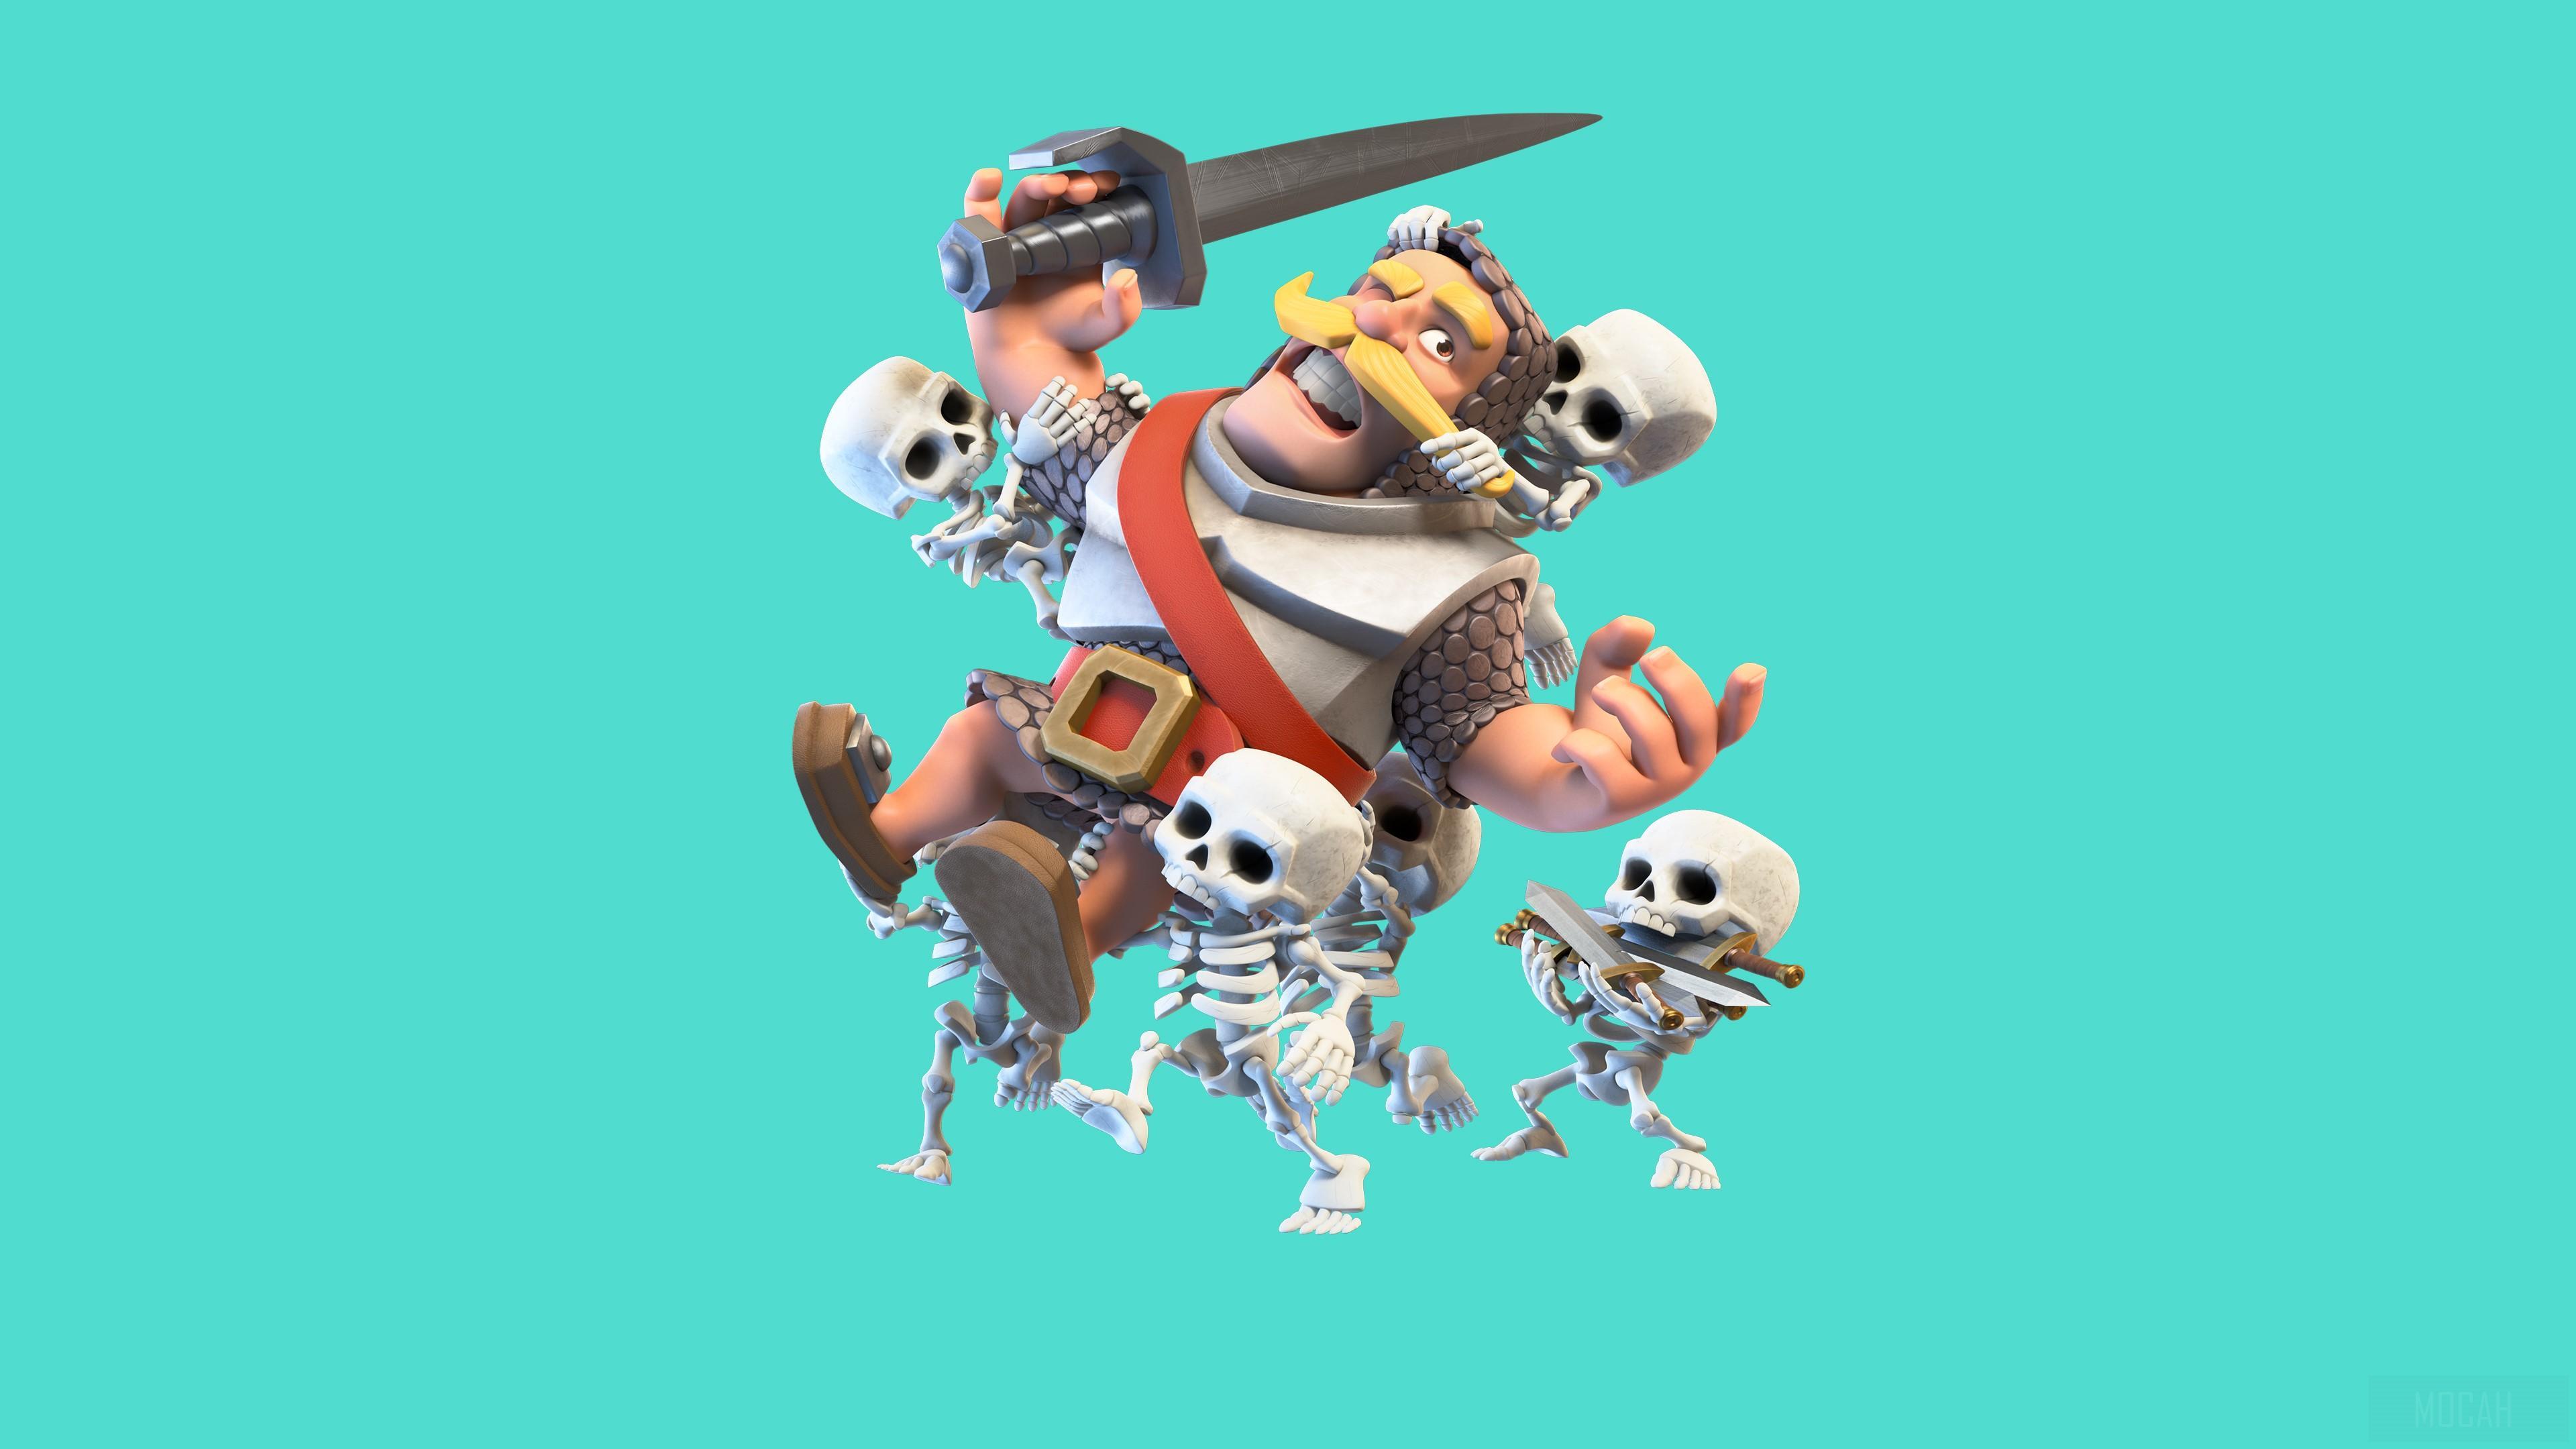 HD wallpaper, Clash Royale Knight And Skelton 4K